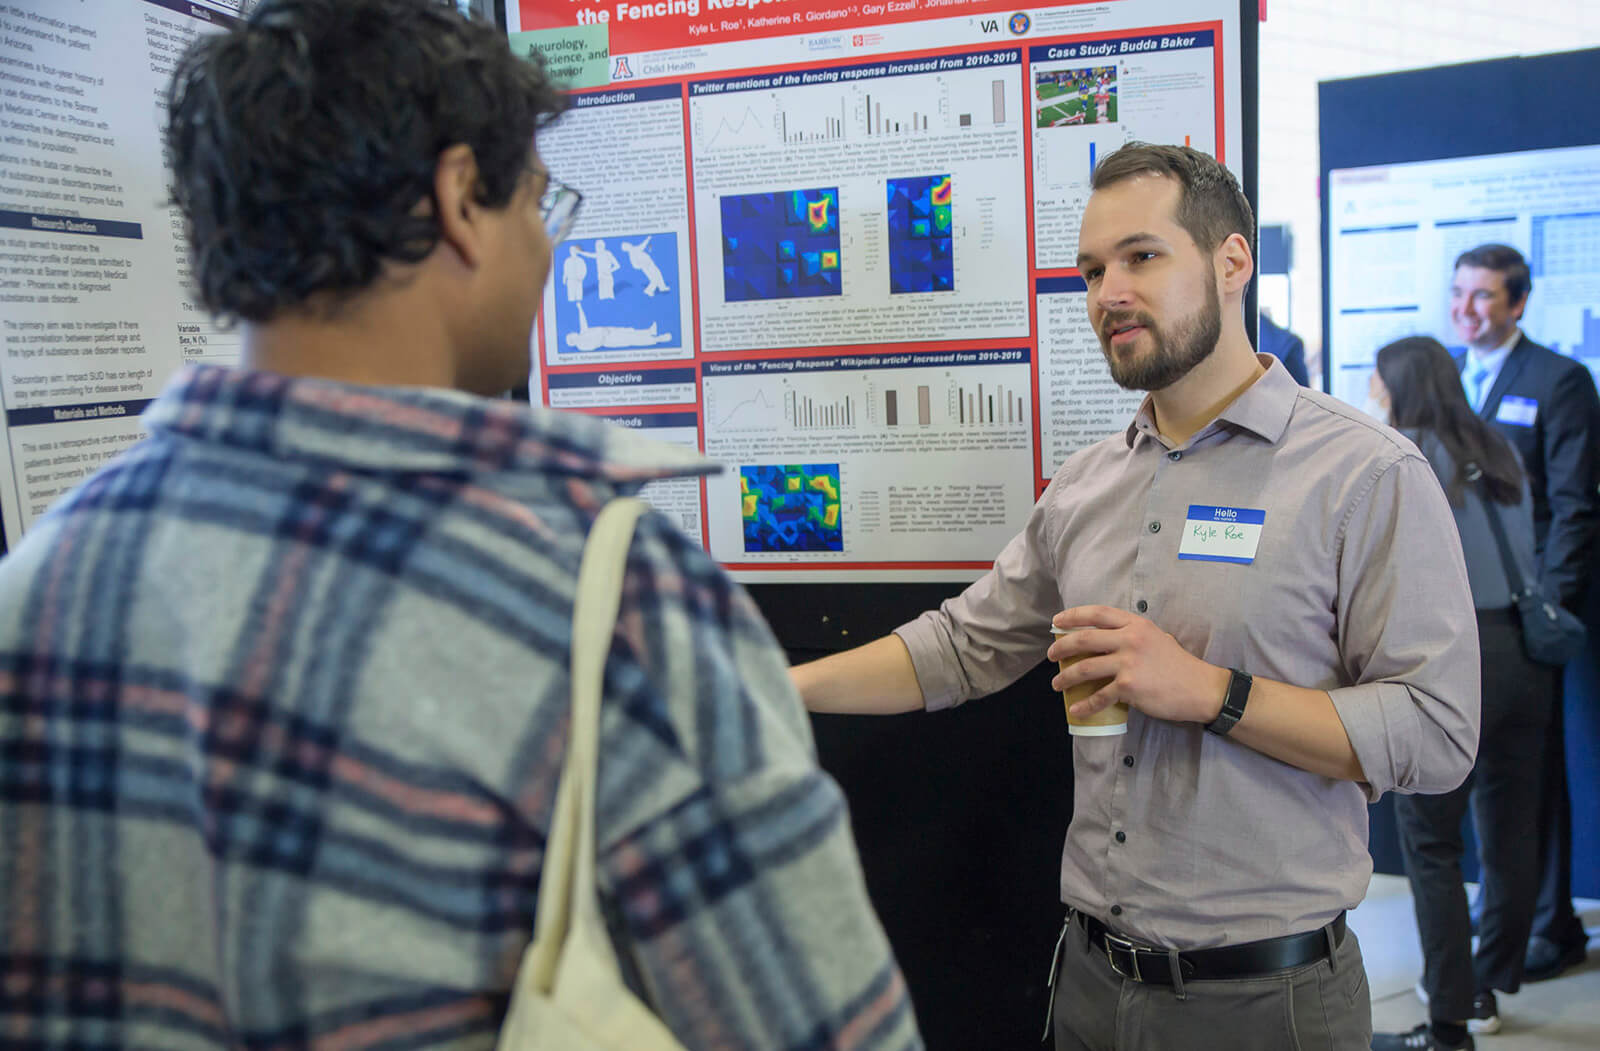 A student discusses his research project with an attendee